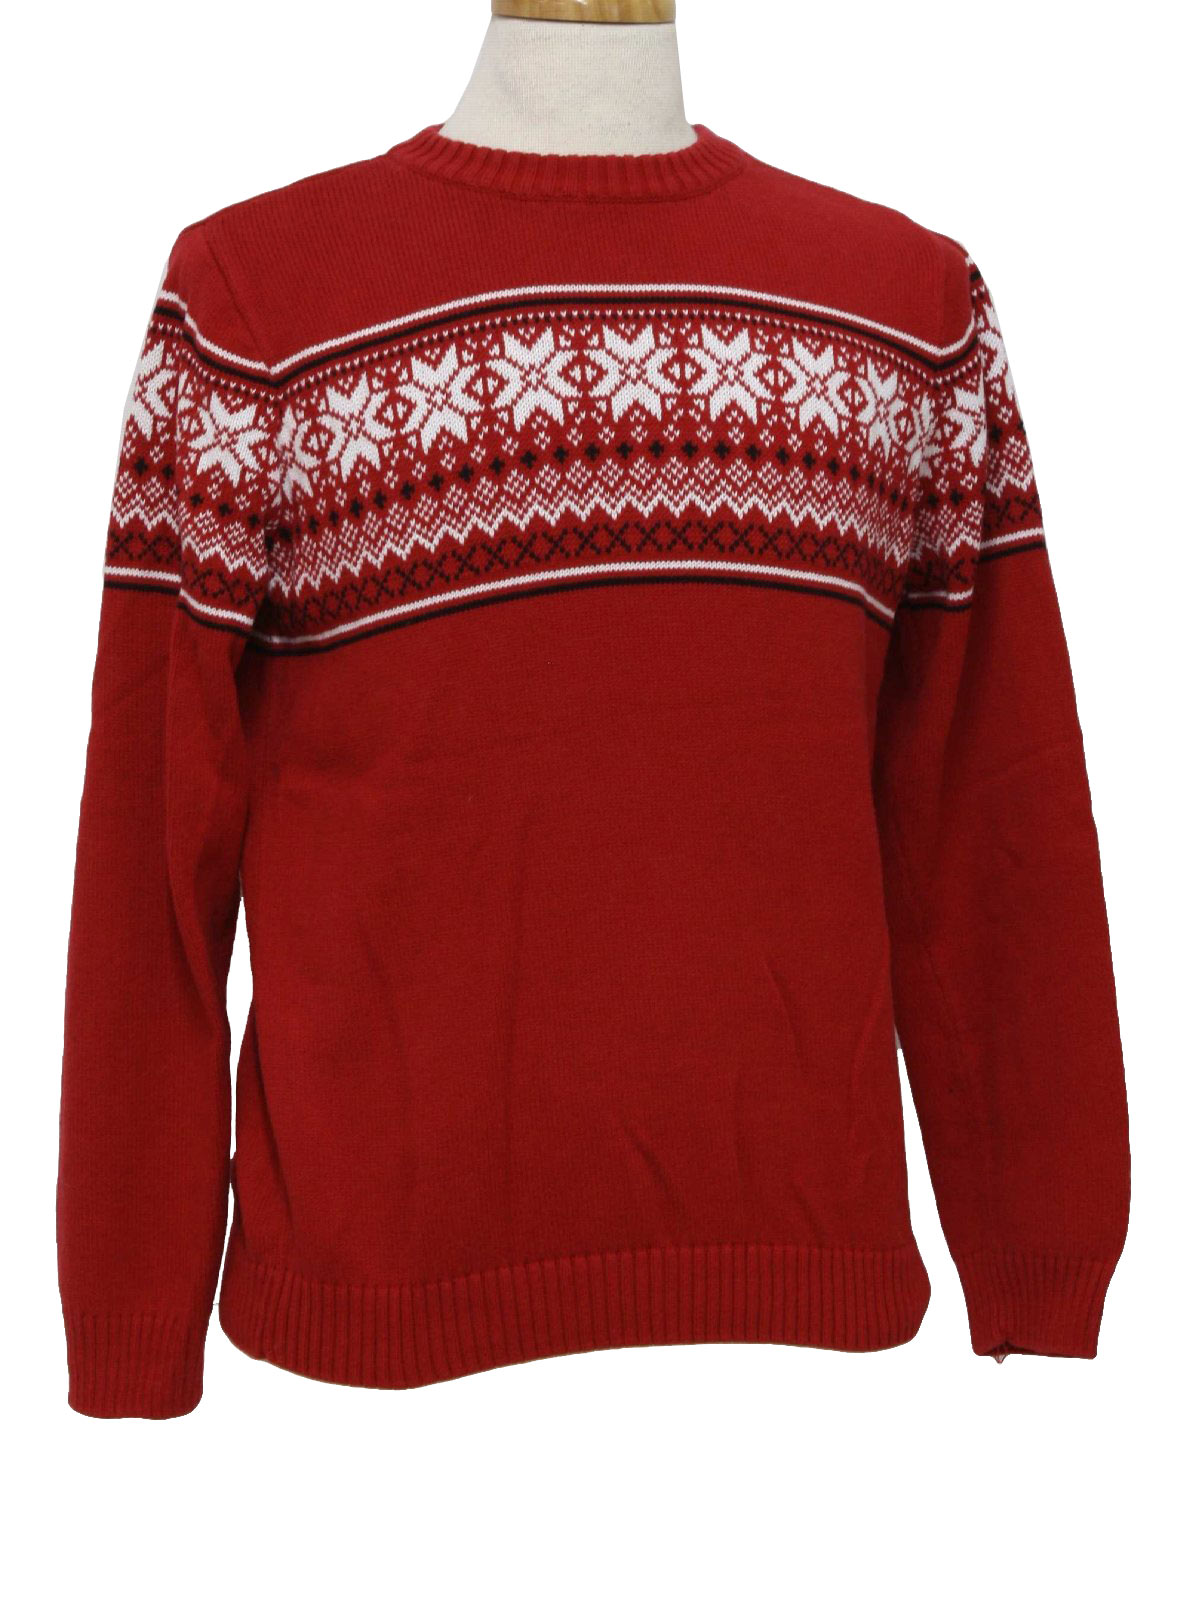 Vintage Class Club 1990s Sweater: 90s -Class Club- Mens red, white and ...